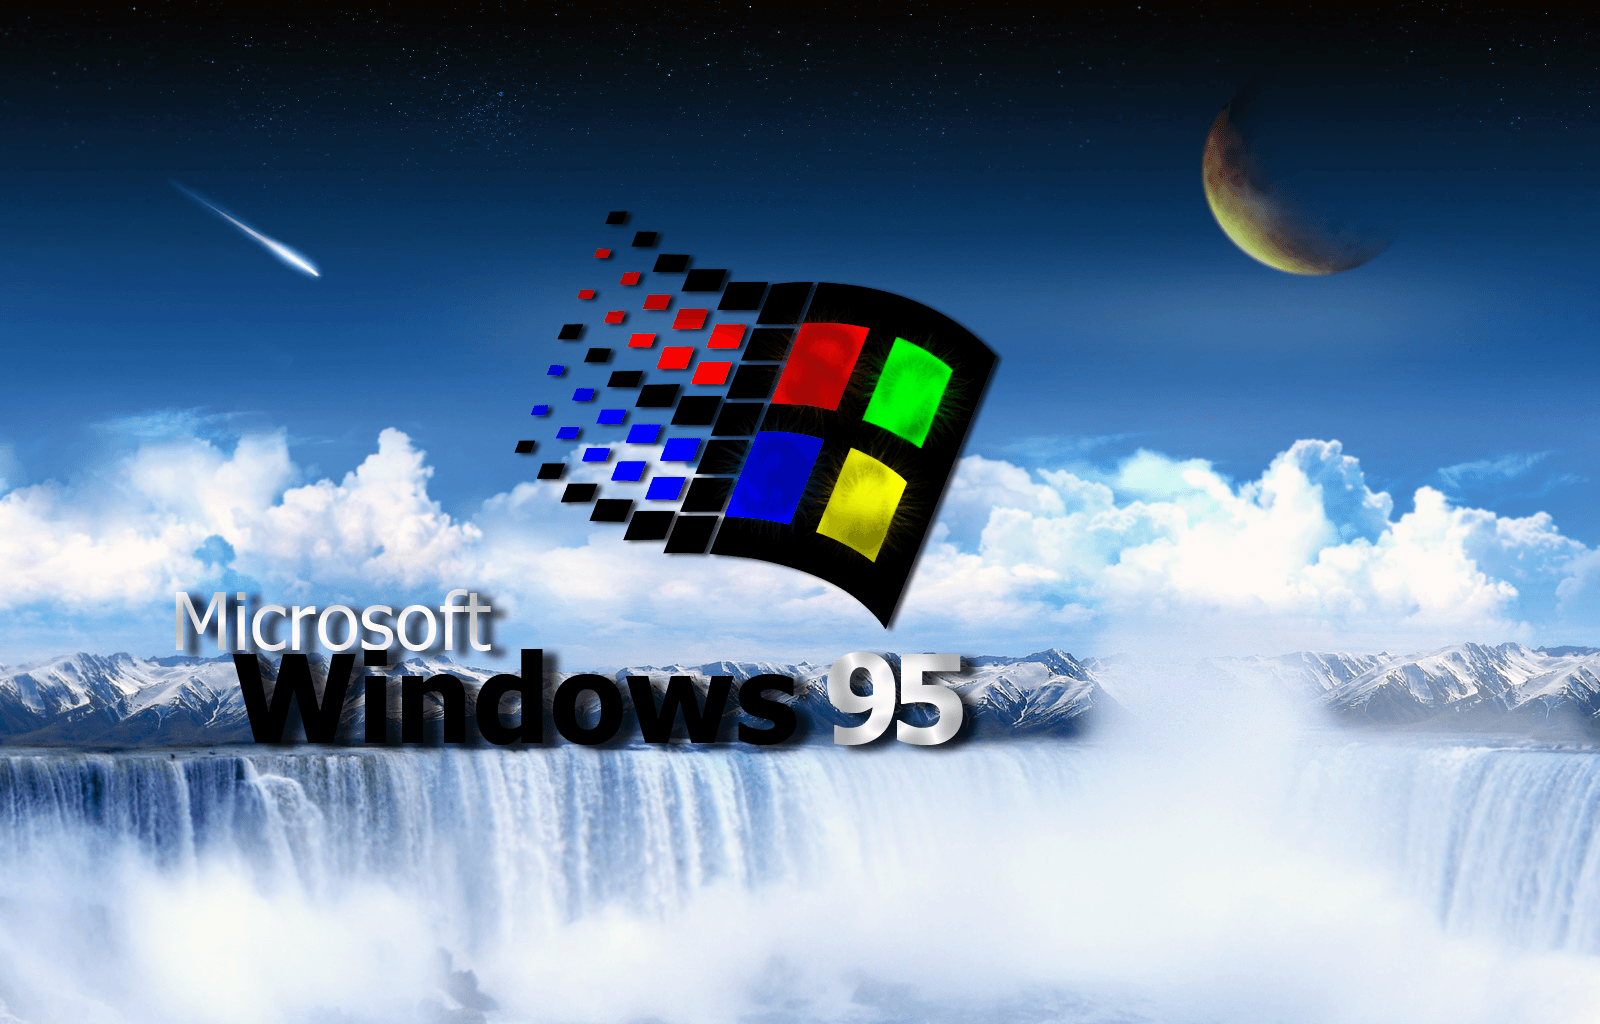 Windows 95 Wallpapers - Classic Win 95 Green Wallpaper for iPhone Free